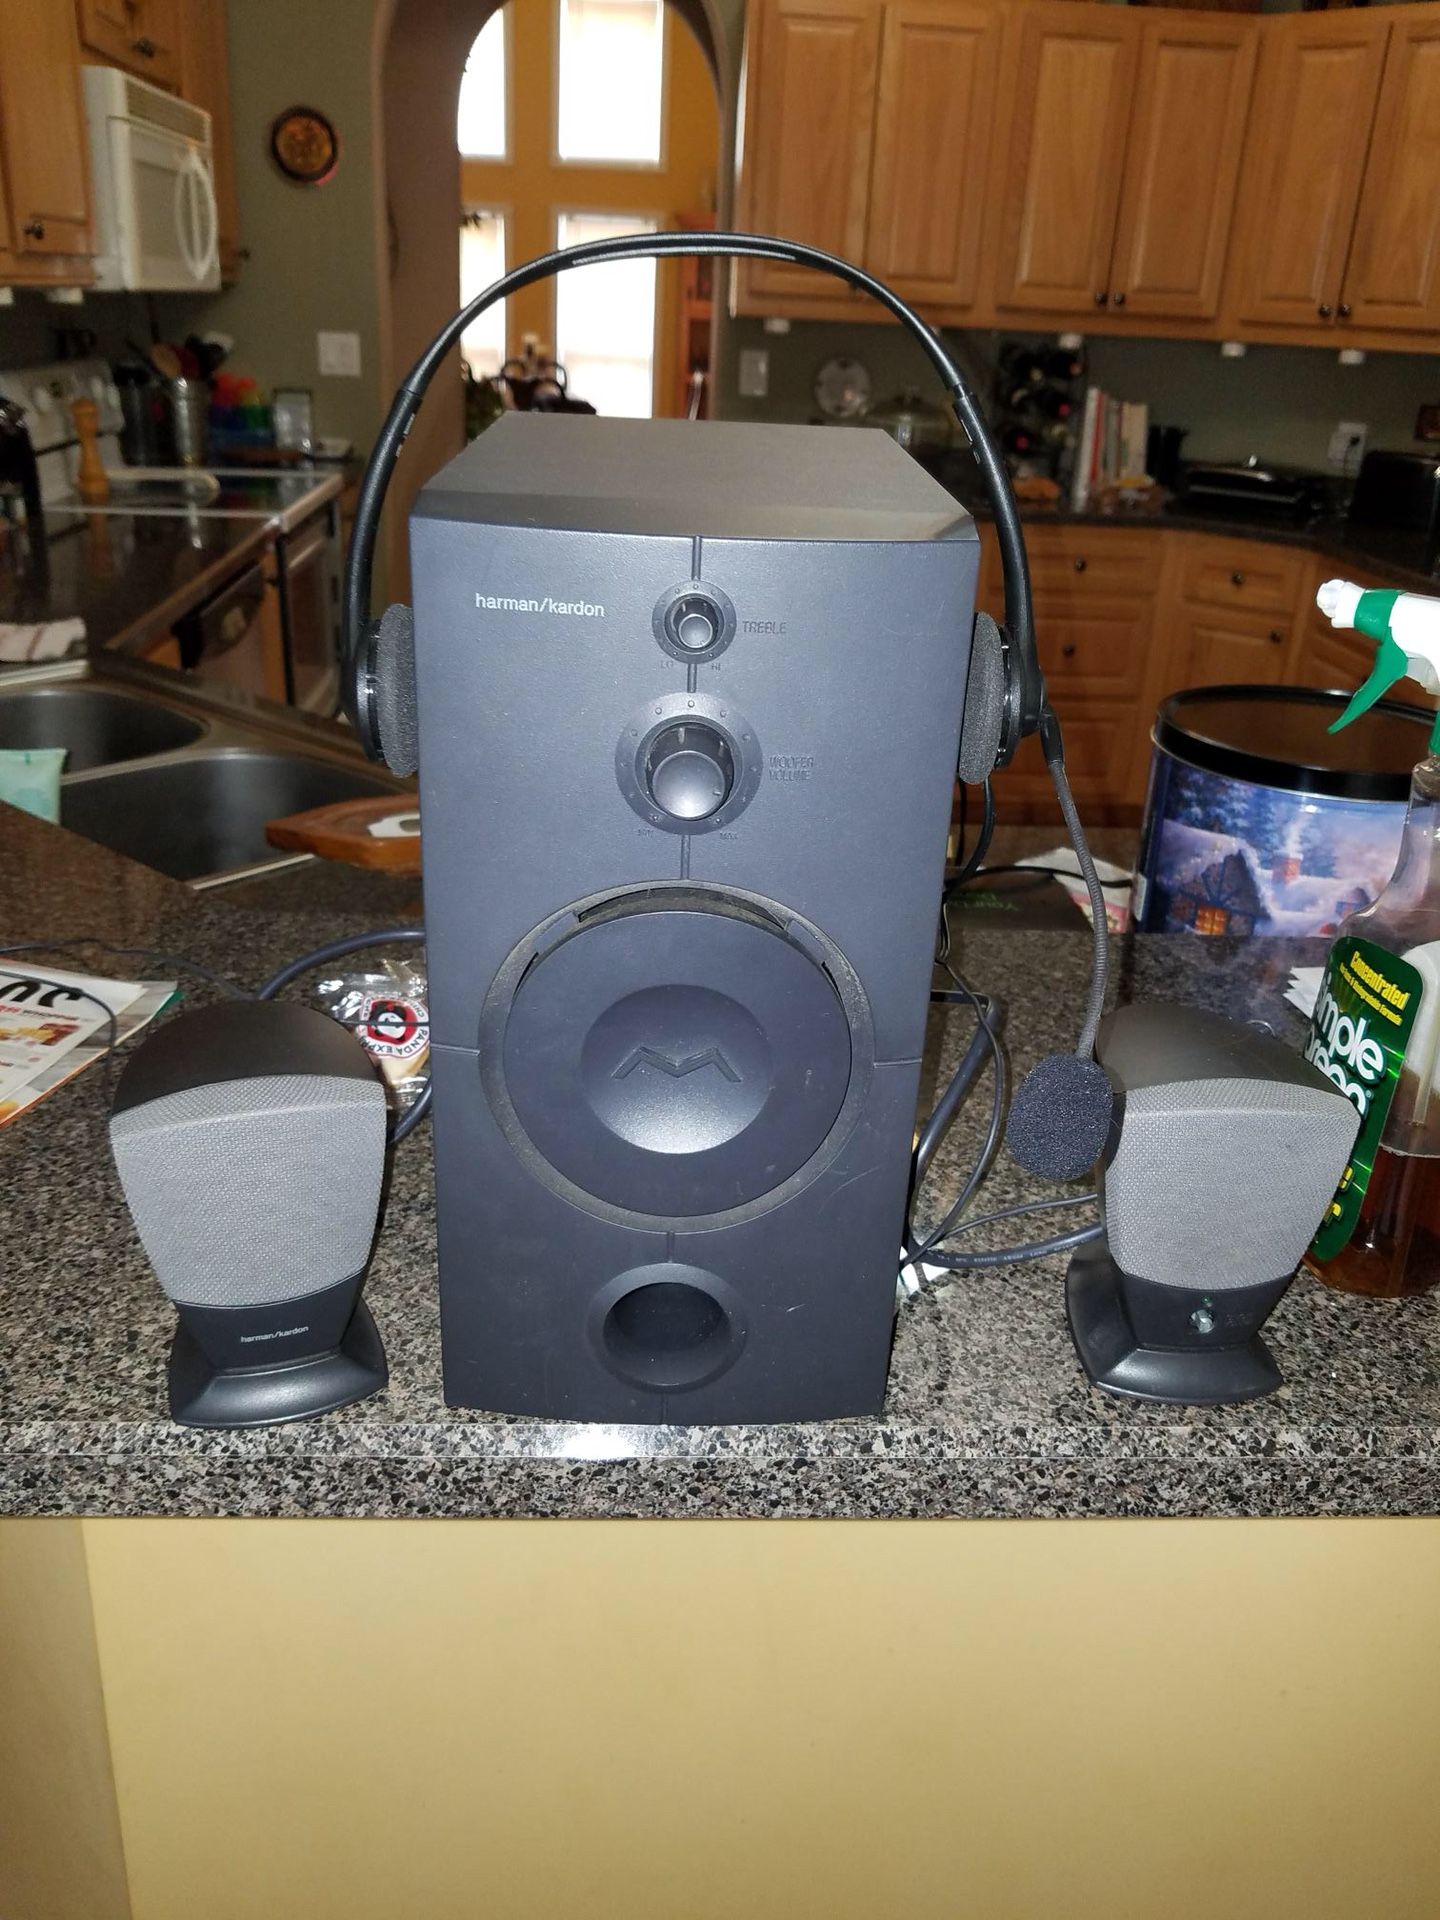 Computer or stereo speakers with headset